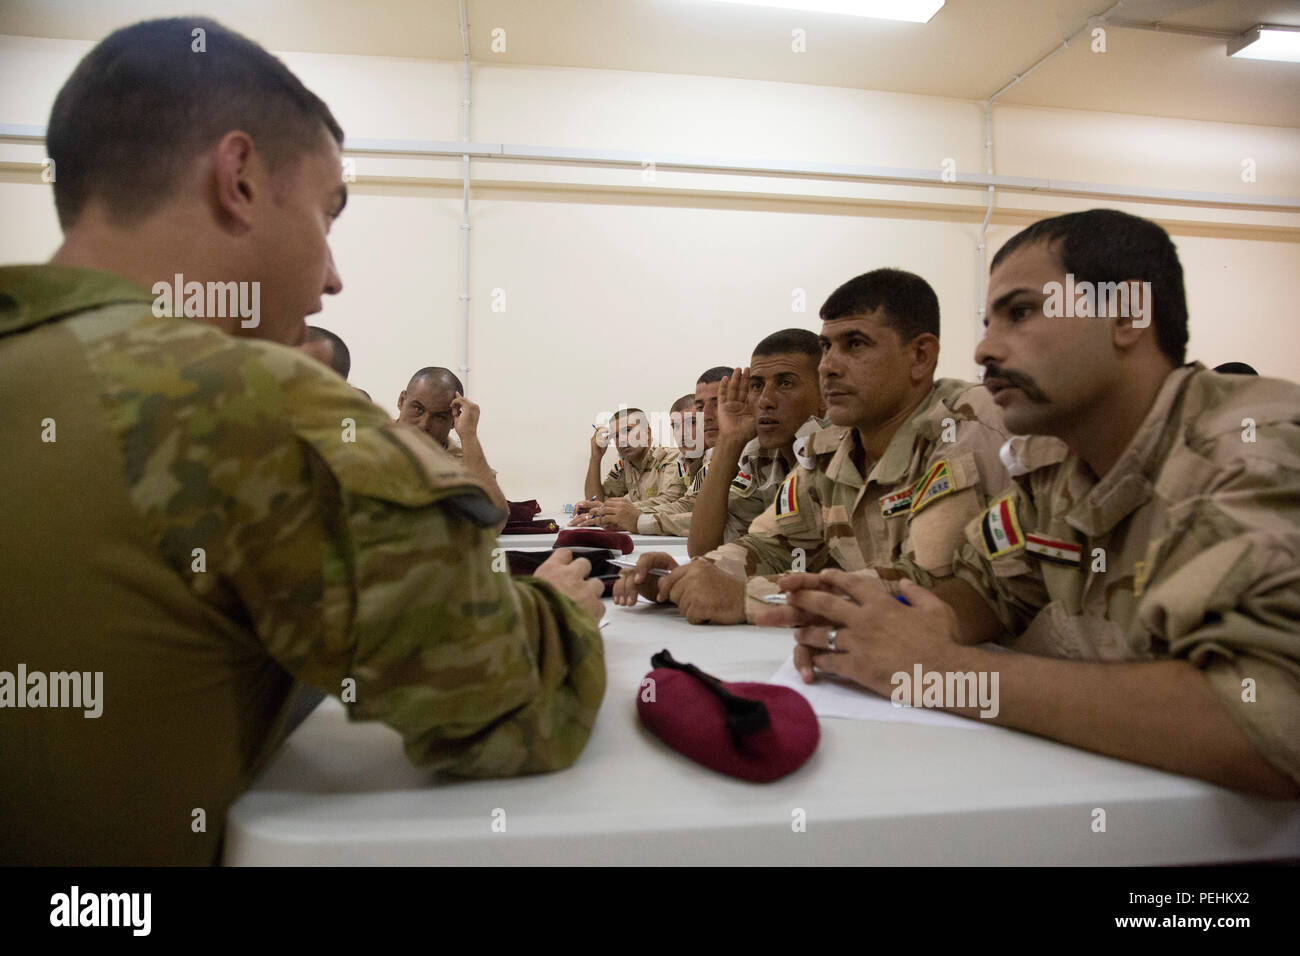 An Australian soldier assigned to Task Group Taji speaks to a group of Iraqi soldiers attending the noncommissioned officer academy at Camp Taji, Iraq, Aug. 22, 2015. Task Group Taji spearheaded the academy concept in order to teach Iraqi NCOs how to train and care for their soldiers in different situations. Through professional development with the Iraqi NCOs, Combined Joint Task Force – Operation Inherent Resolve is empowering the Iraqi security forces in the fight against the Islamic State of Iraq and the Levant. (U.S. Army photo by Spc. Paris Maxey/Released) Stock Photo